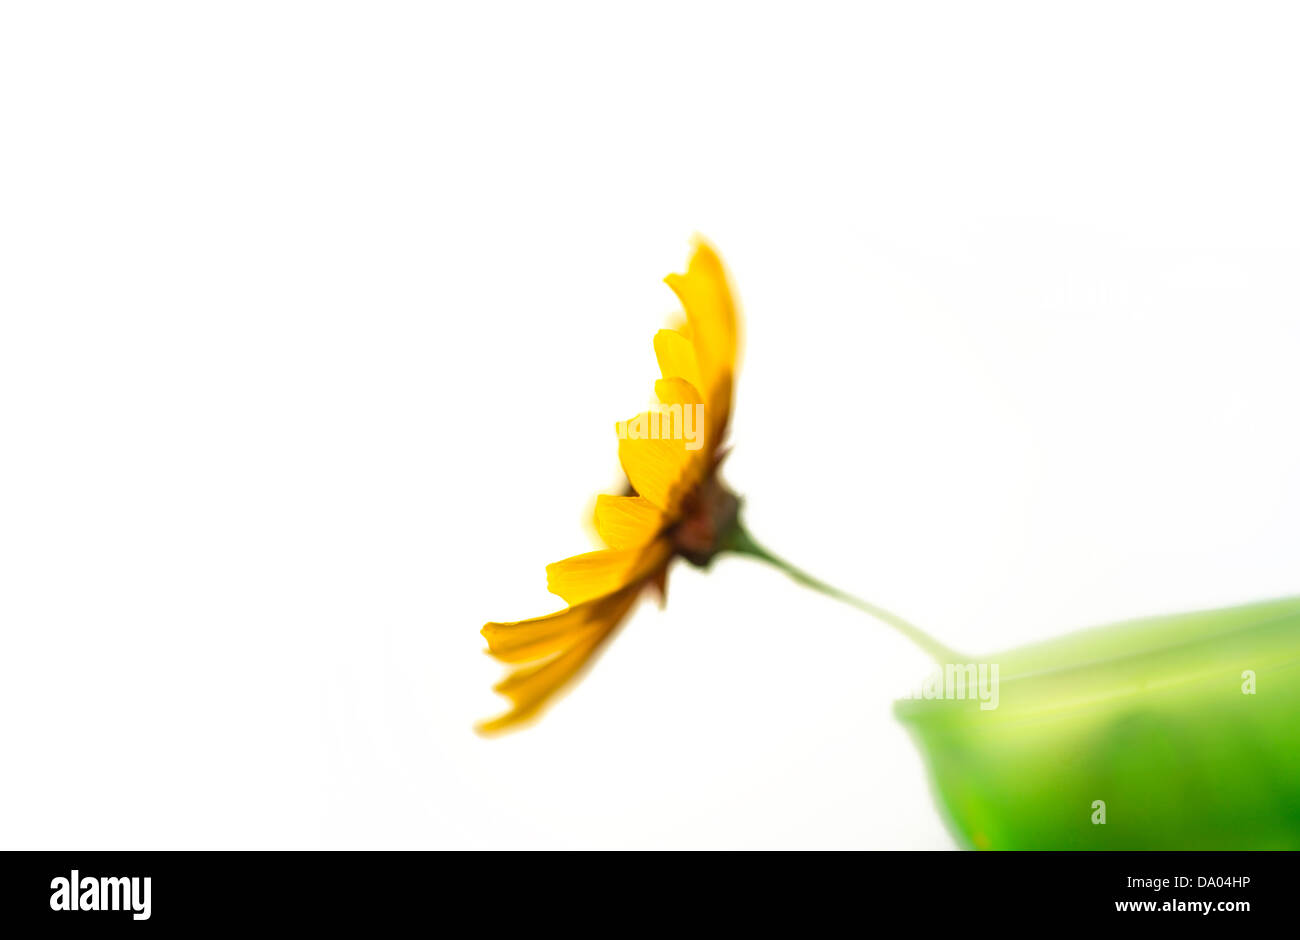 Yellow Daisy Flower Leaning Out Of Green Glass Vase Stock Photo